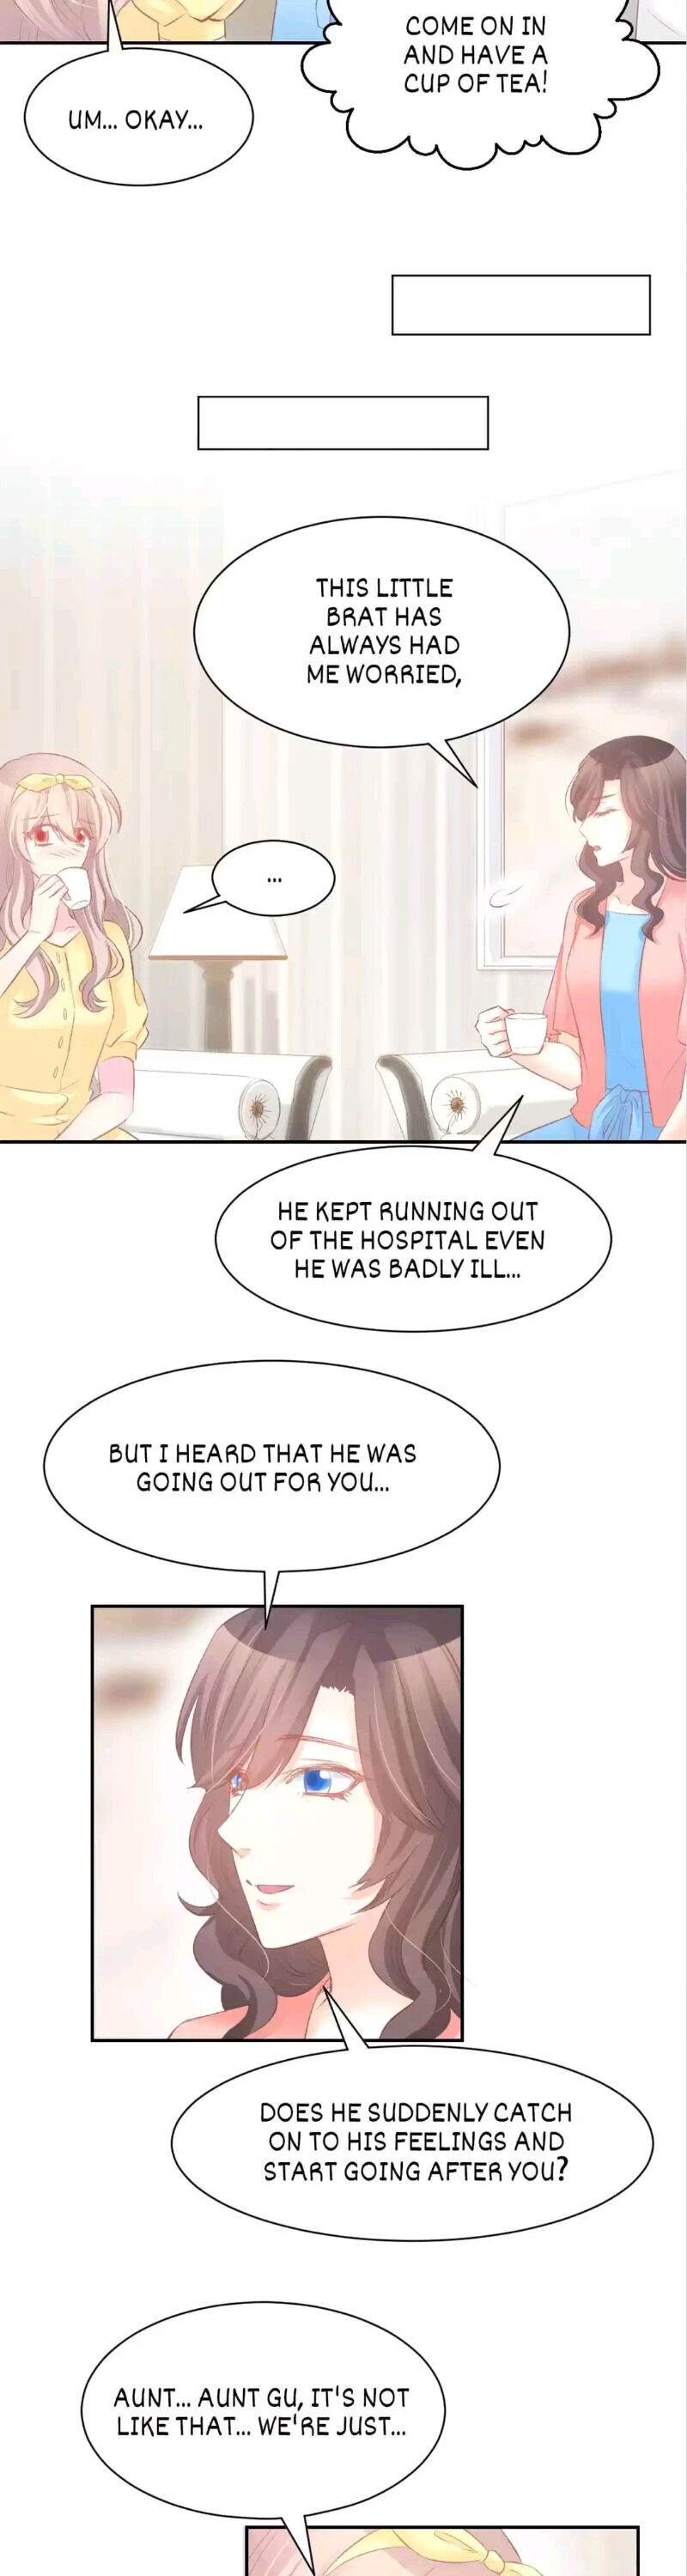 The Trap Of Mollycoddling - Page 2